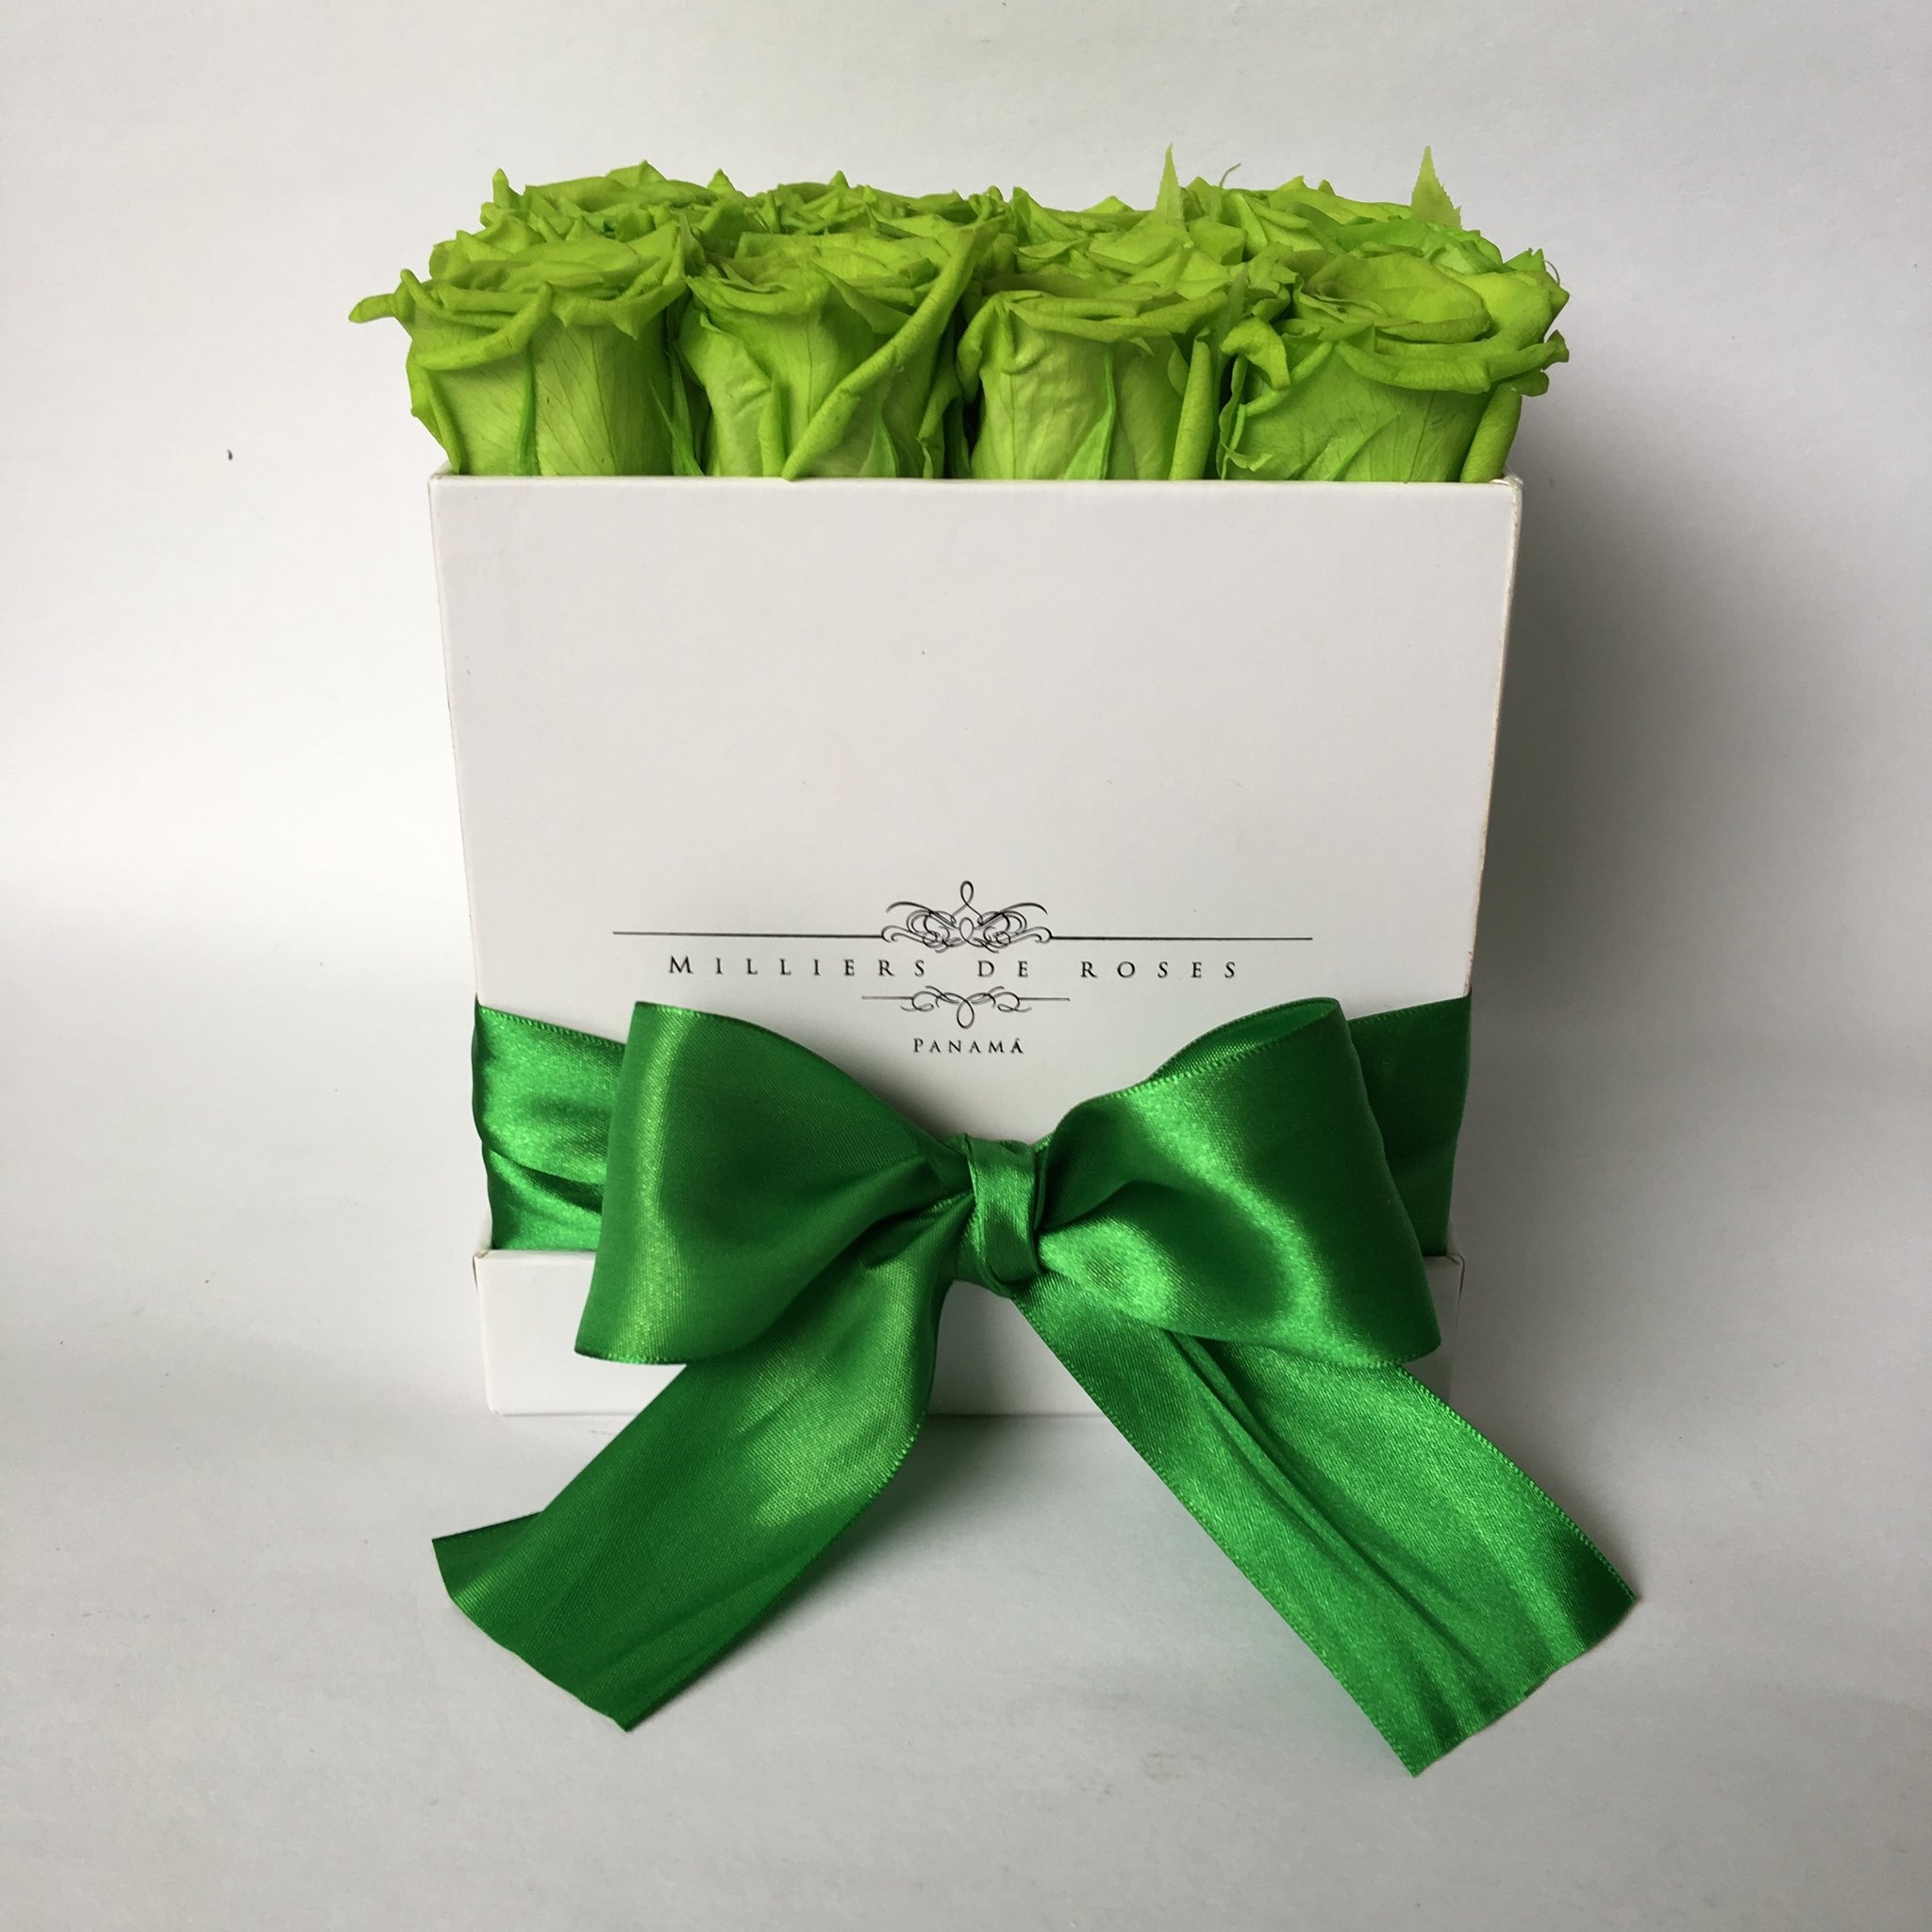 Milliers Square Box - White - Green PRESERVADAS – Milliers De Roses ...